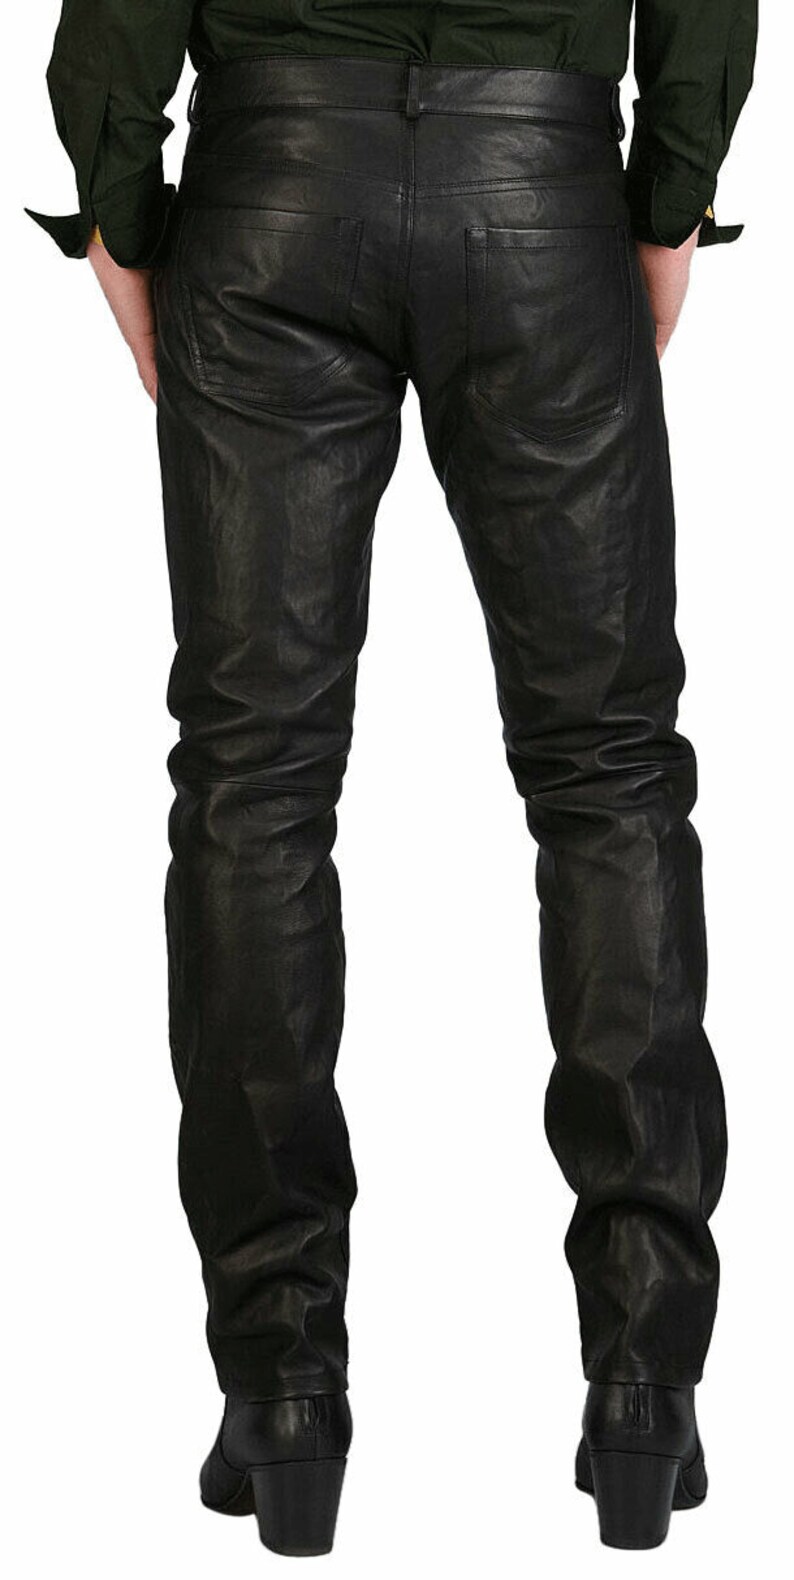 Men's Leather Pants / Men's Stylish Leather Outfits / - Etsy